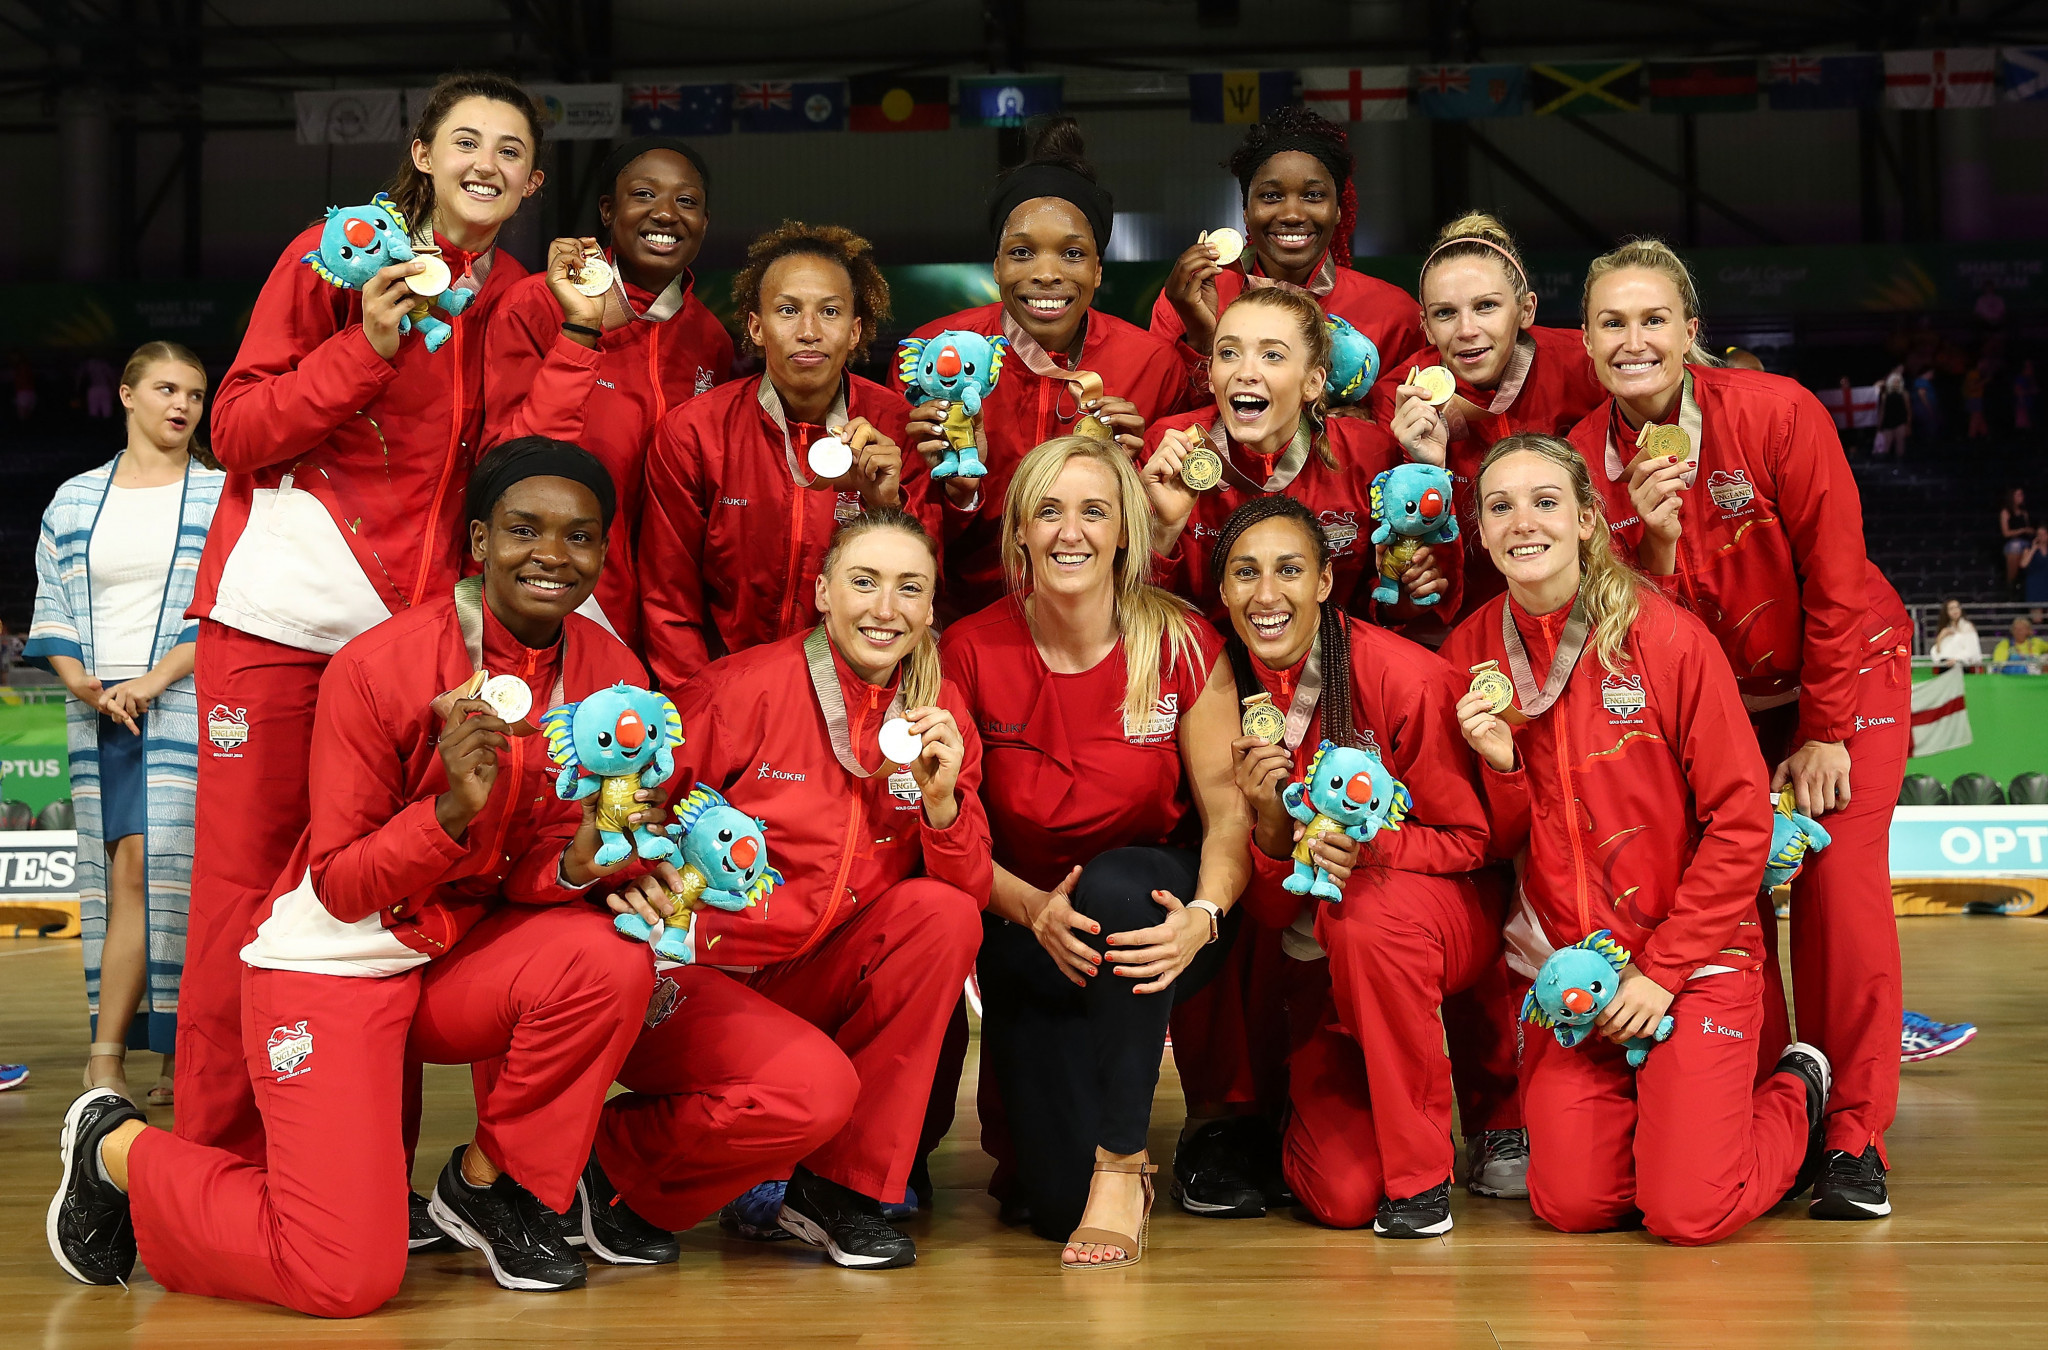 England claimed a last-gasp victory over Australia to win netball gold for the first time at Gold Coast 2018 ©Getty Images